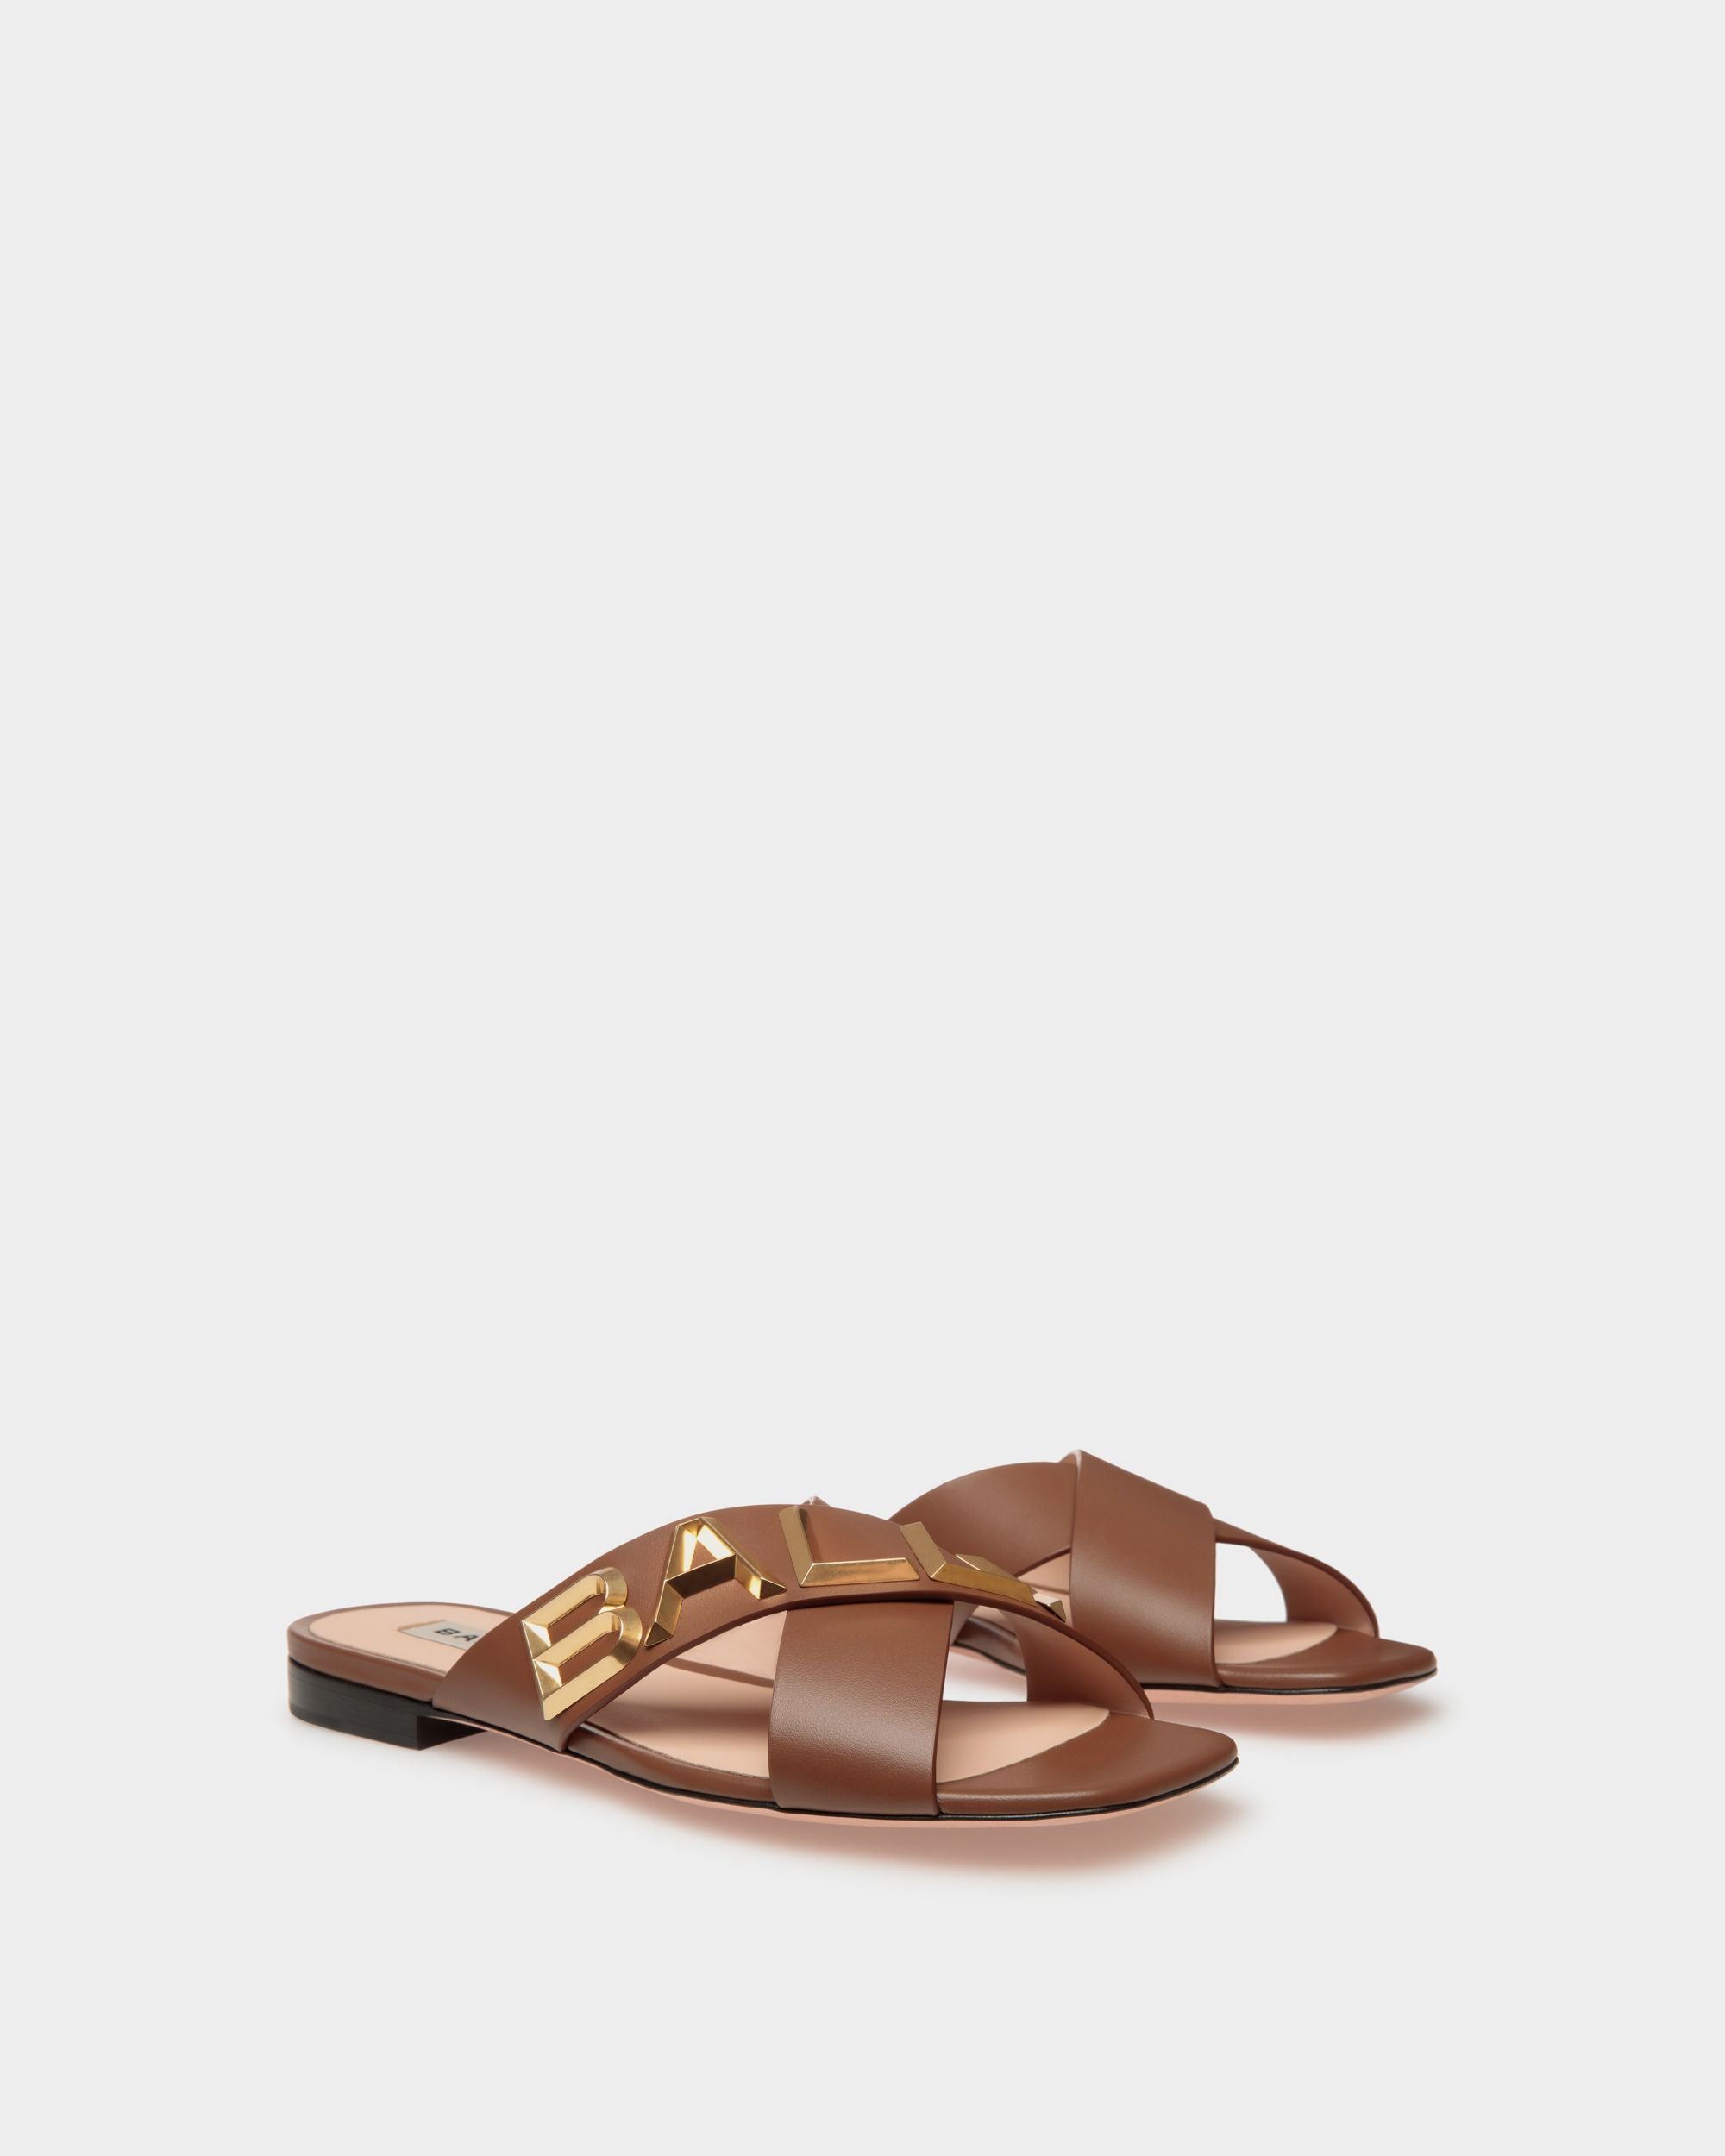 Bally Spell | Women's Flat Slide in Brown Leather | Bally | Still Life 3/4 Front